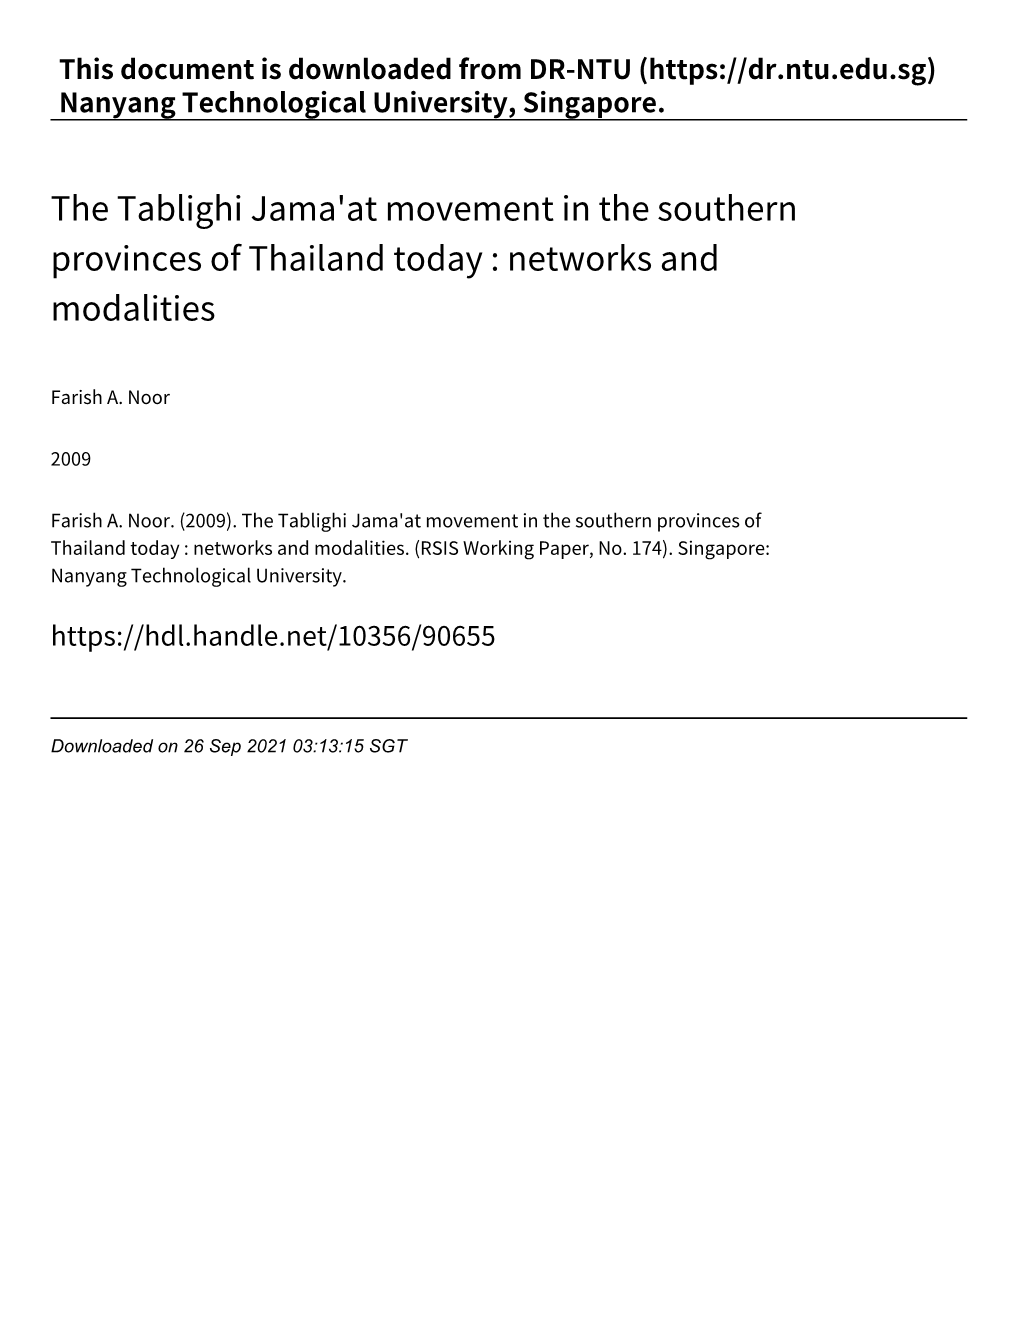 The Tablighi Jama'at Movement in the Southern Provinces of Thailand Today : Networks and Modalities